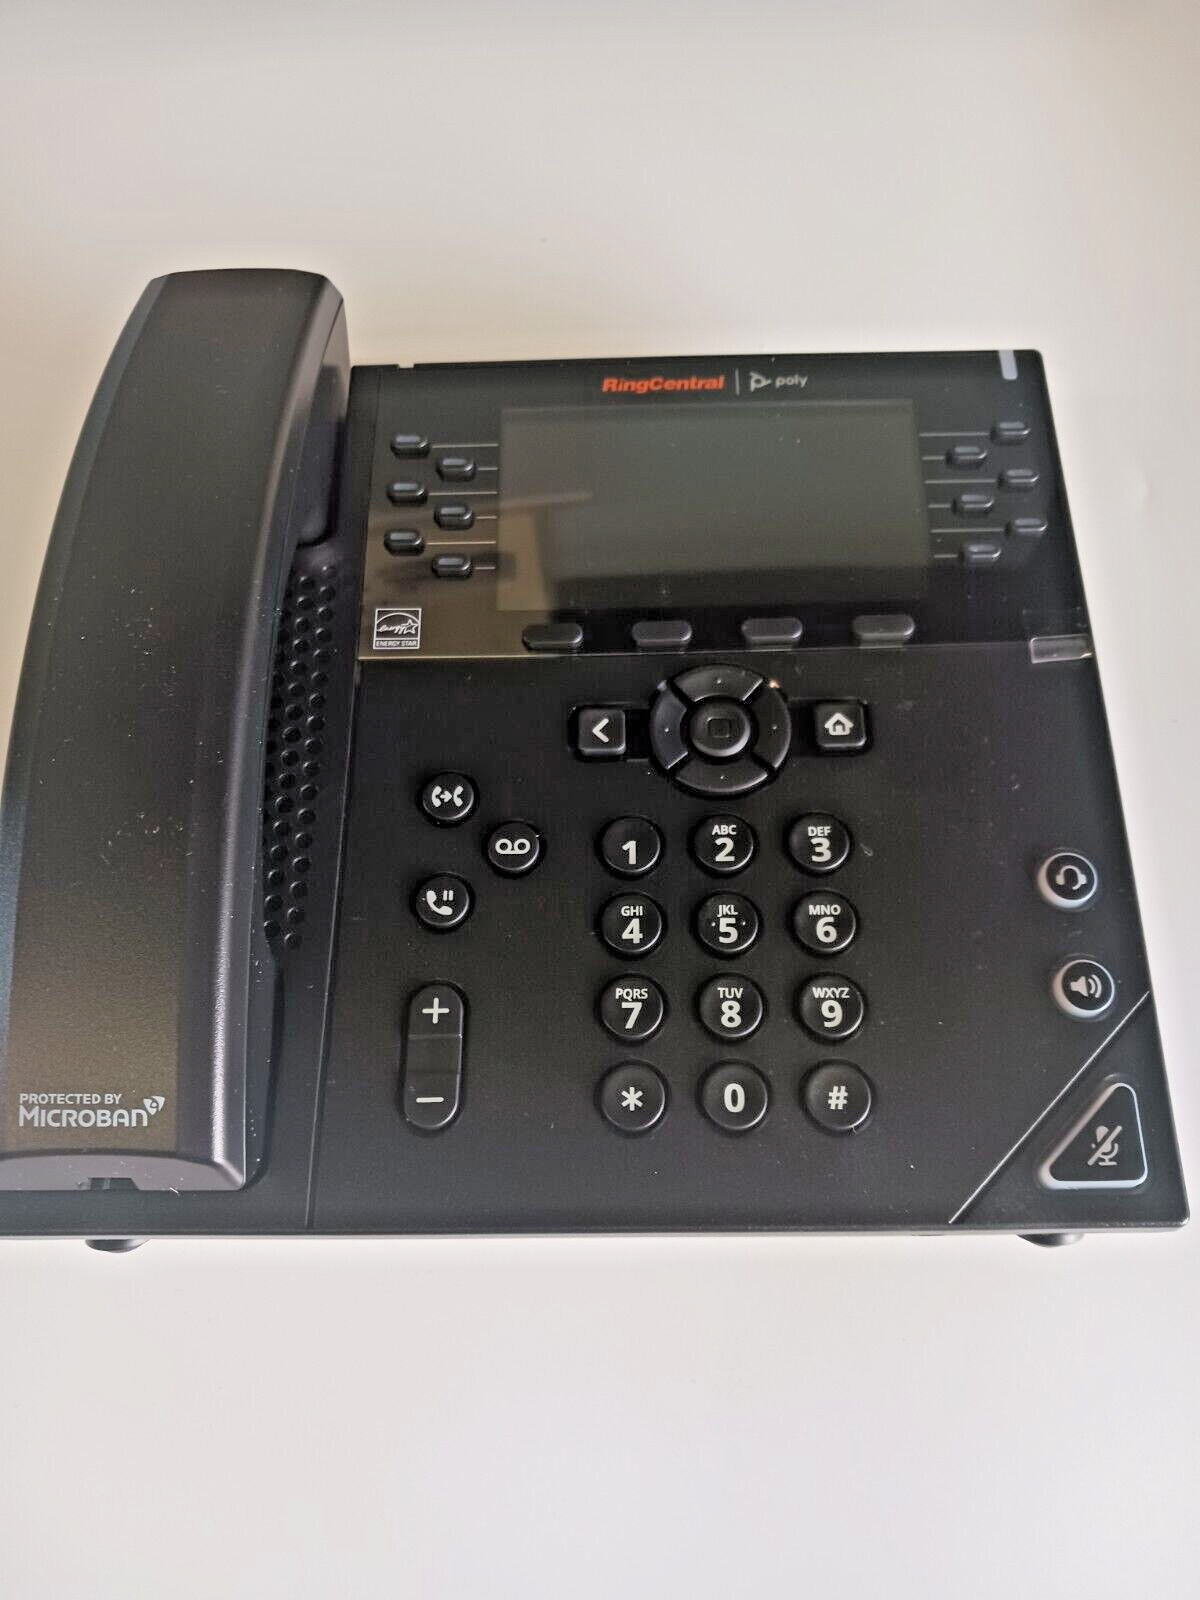 NEW Polycom VVX 450 RingCentral Bus IP Phone - VoIP phone P/N:2201-48840-127